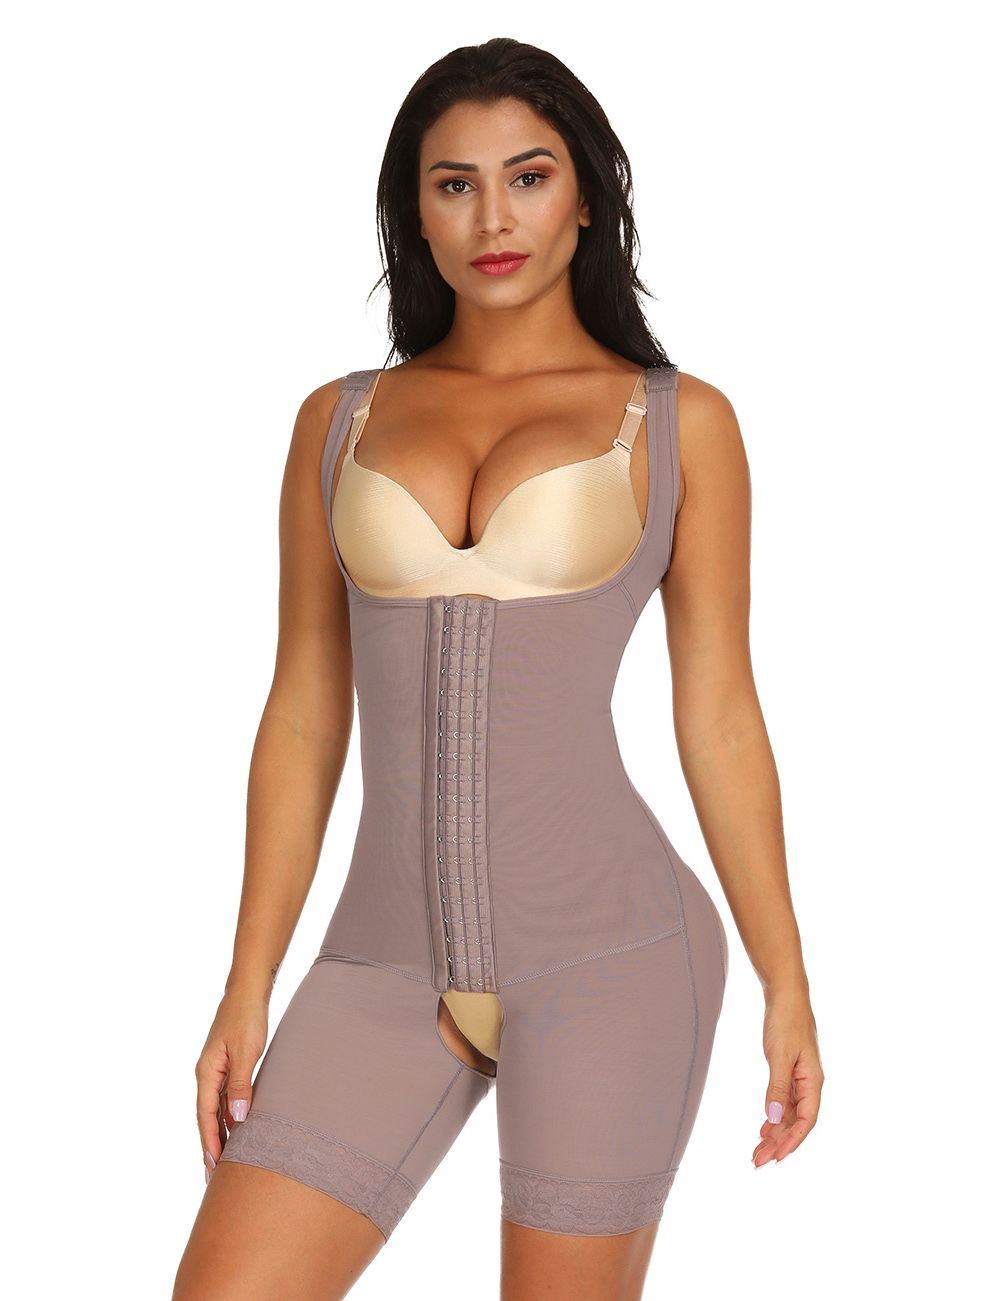 Full Body Firm Compression Tummy Control Body shaper W/ 3 Rows Hook and Eye Closure Available in Size 2X